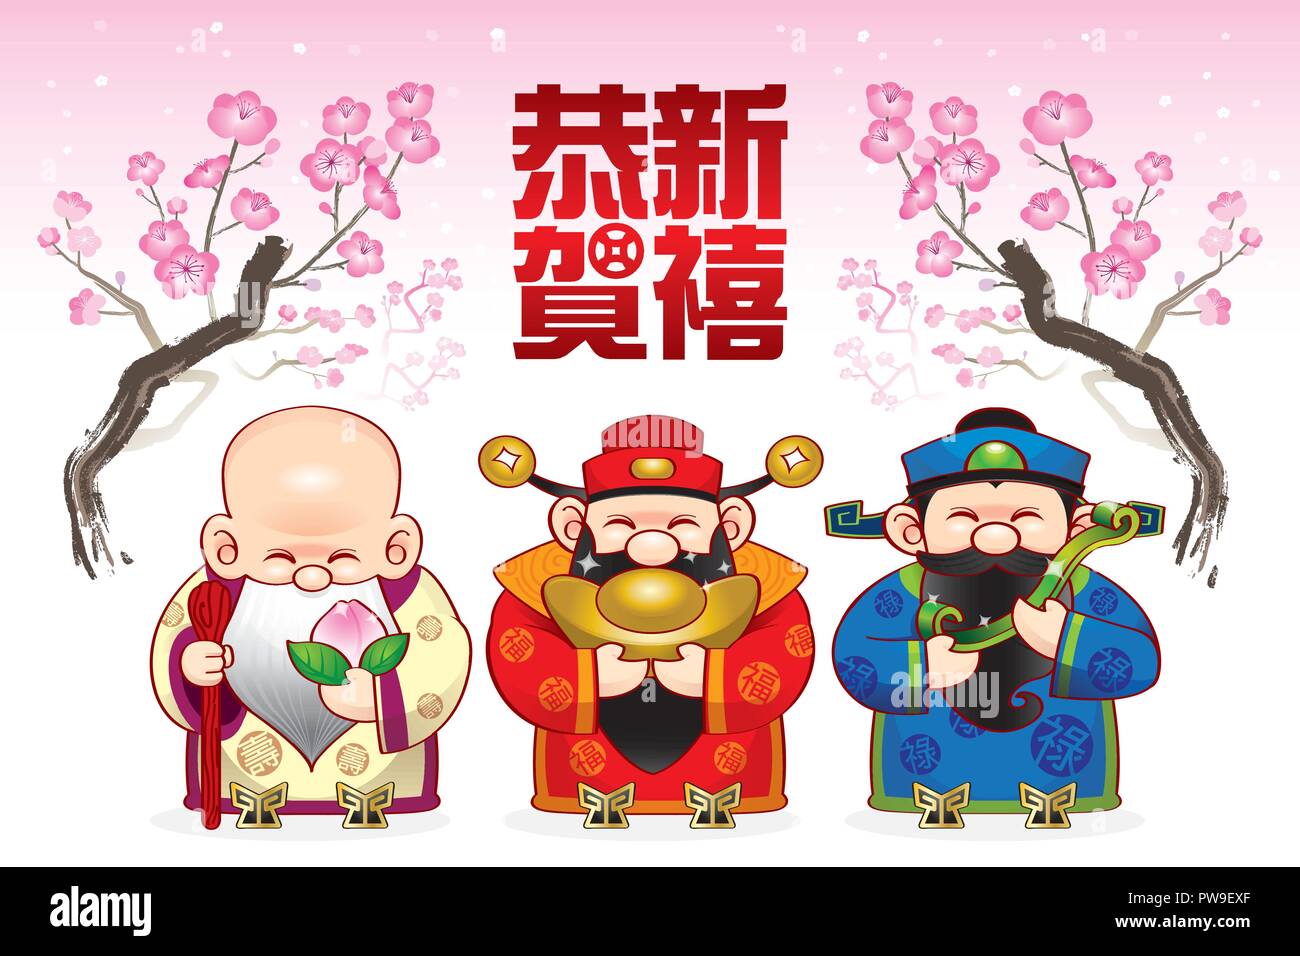 Three cute Chinese gods which represent long life, wealthy and career. The Chinese words means 'wishing you a happy Chinese New Year'. Stock Vector